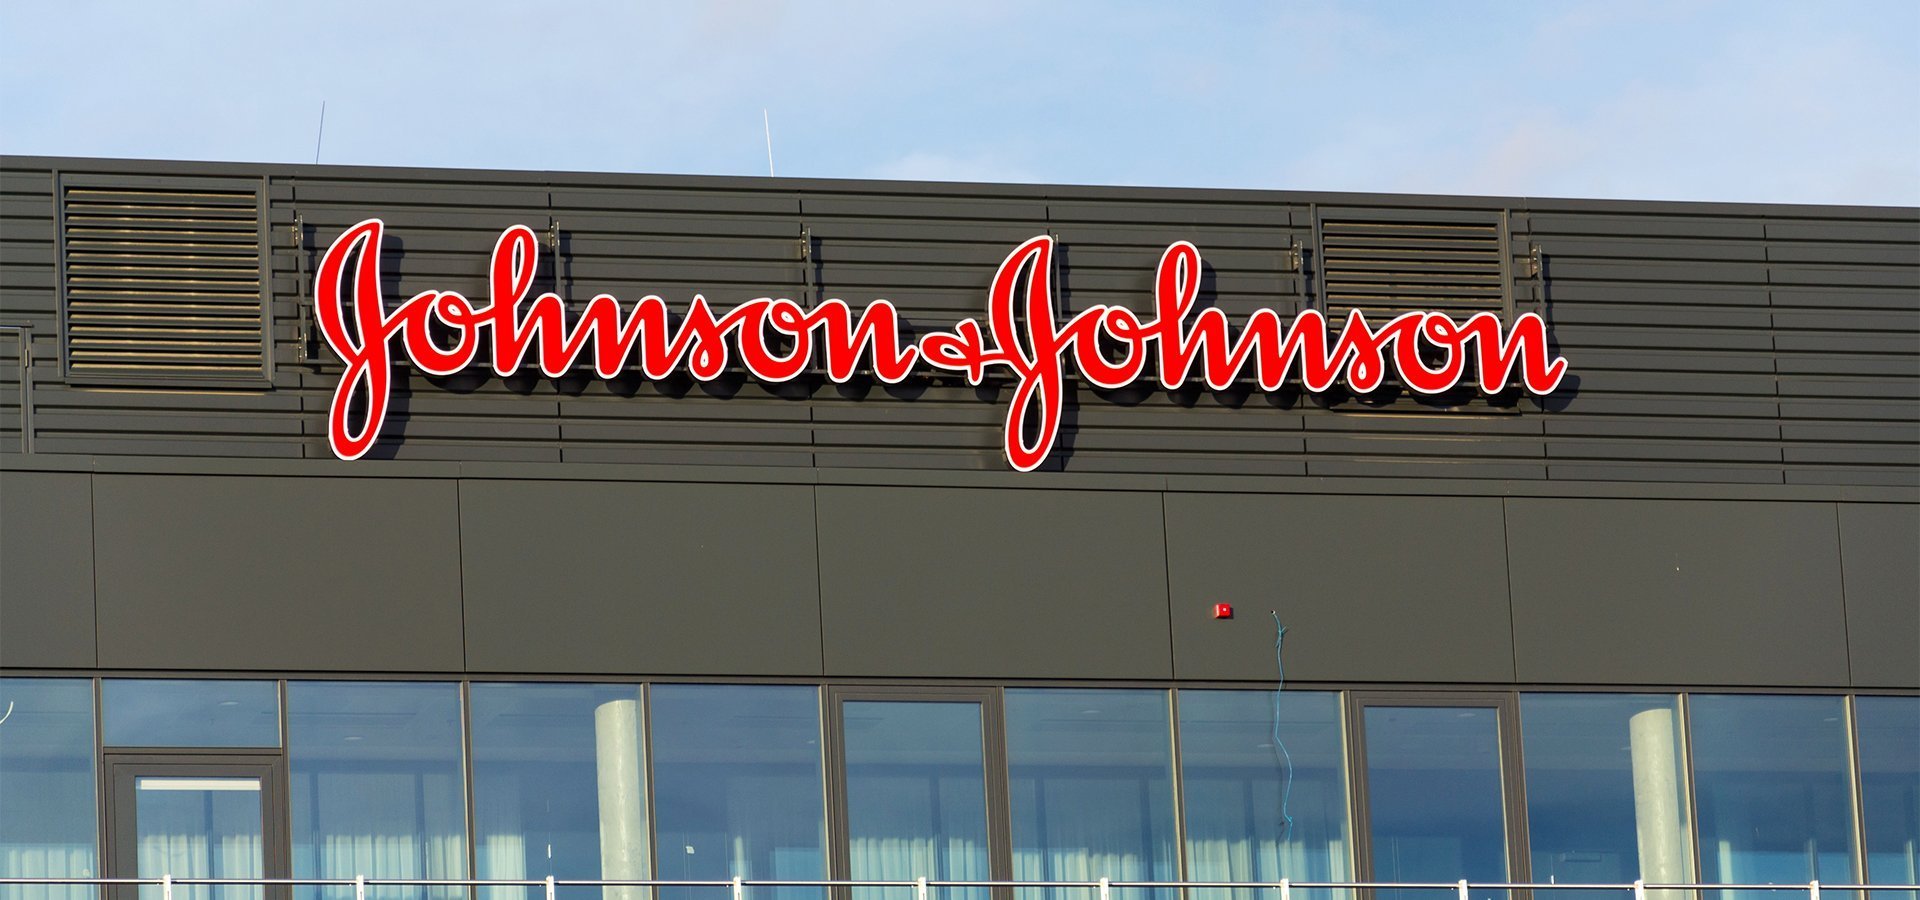 johnson and johnson logo reminds people that a judge ruled against J&J